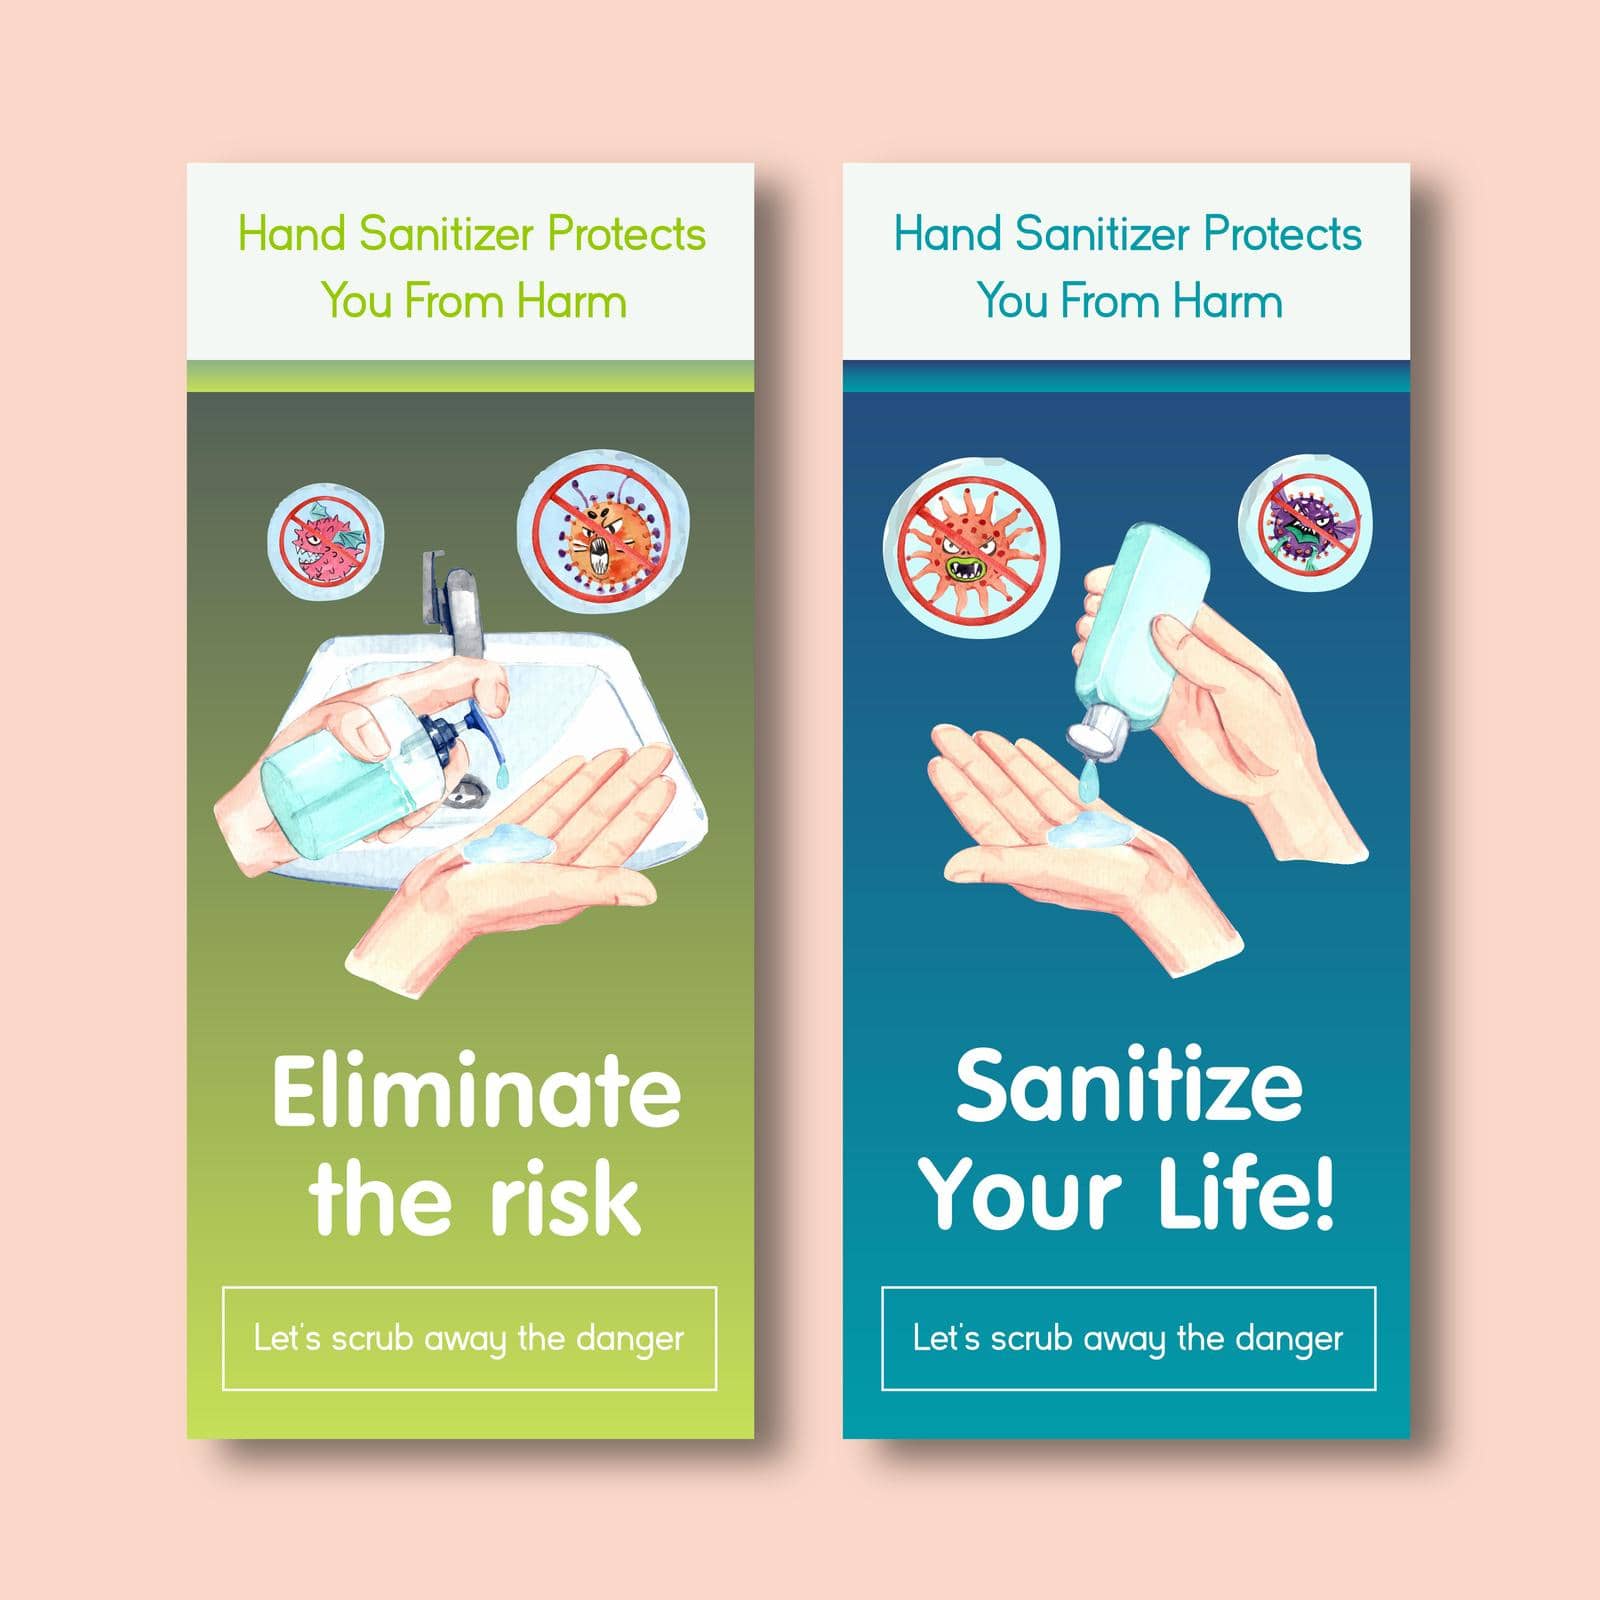 Hand sanitizer flyer template design with protect and safety about Coronavirus and bateria